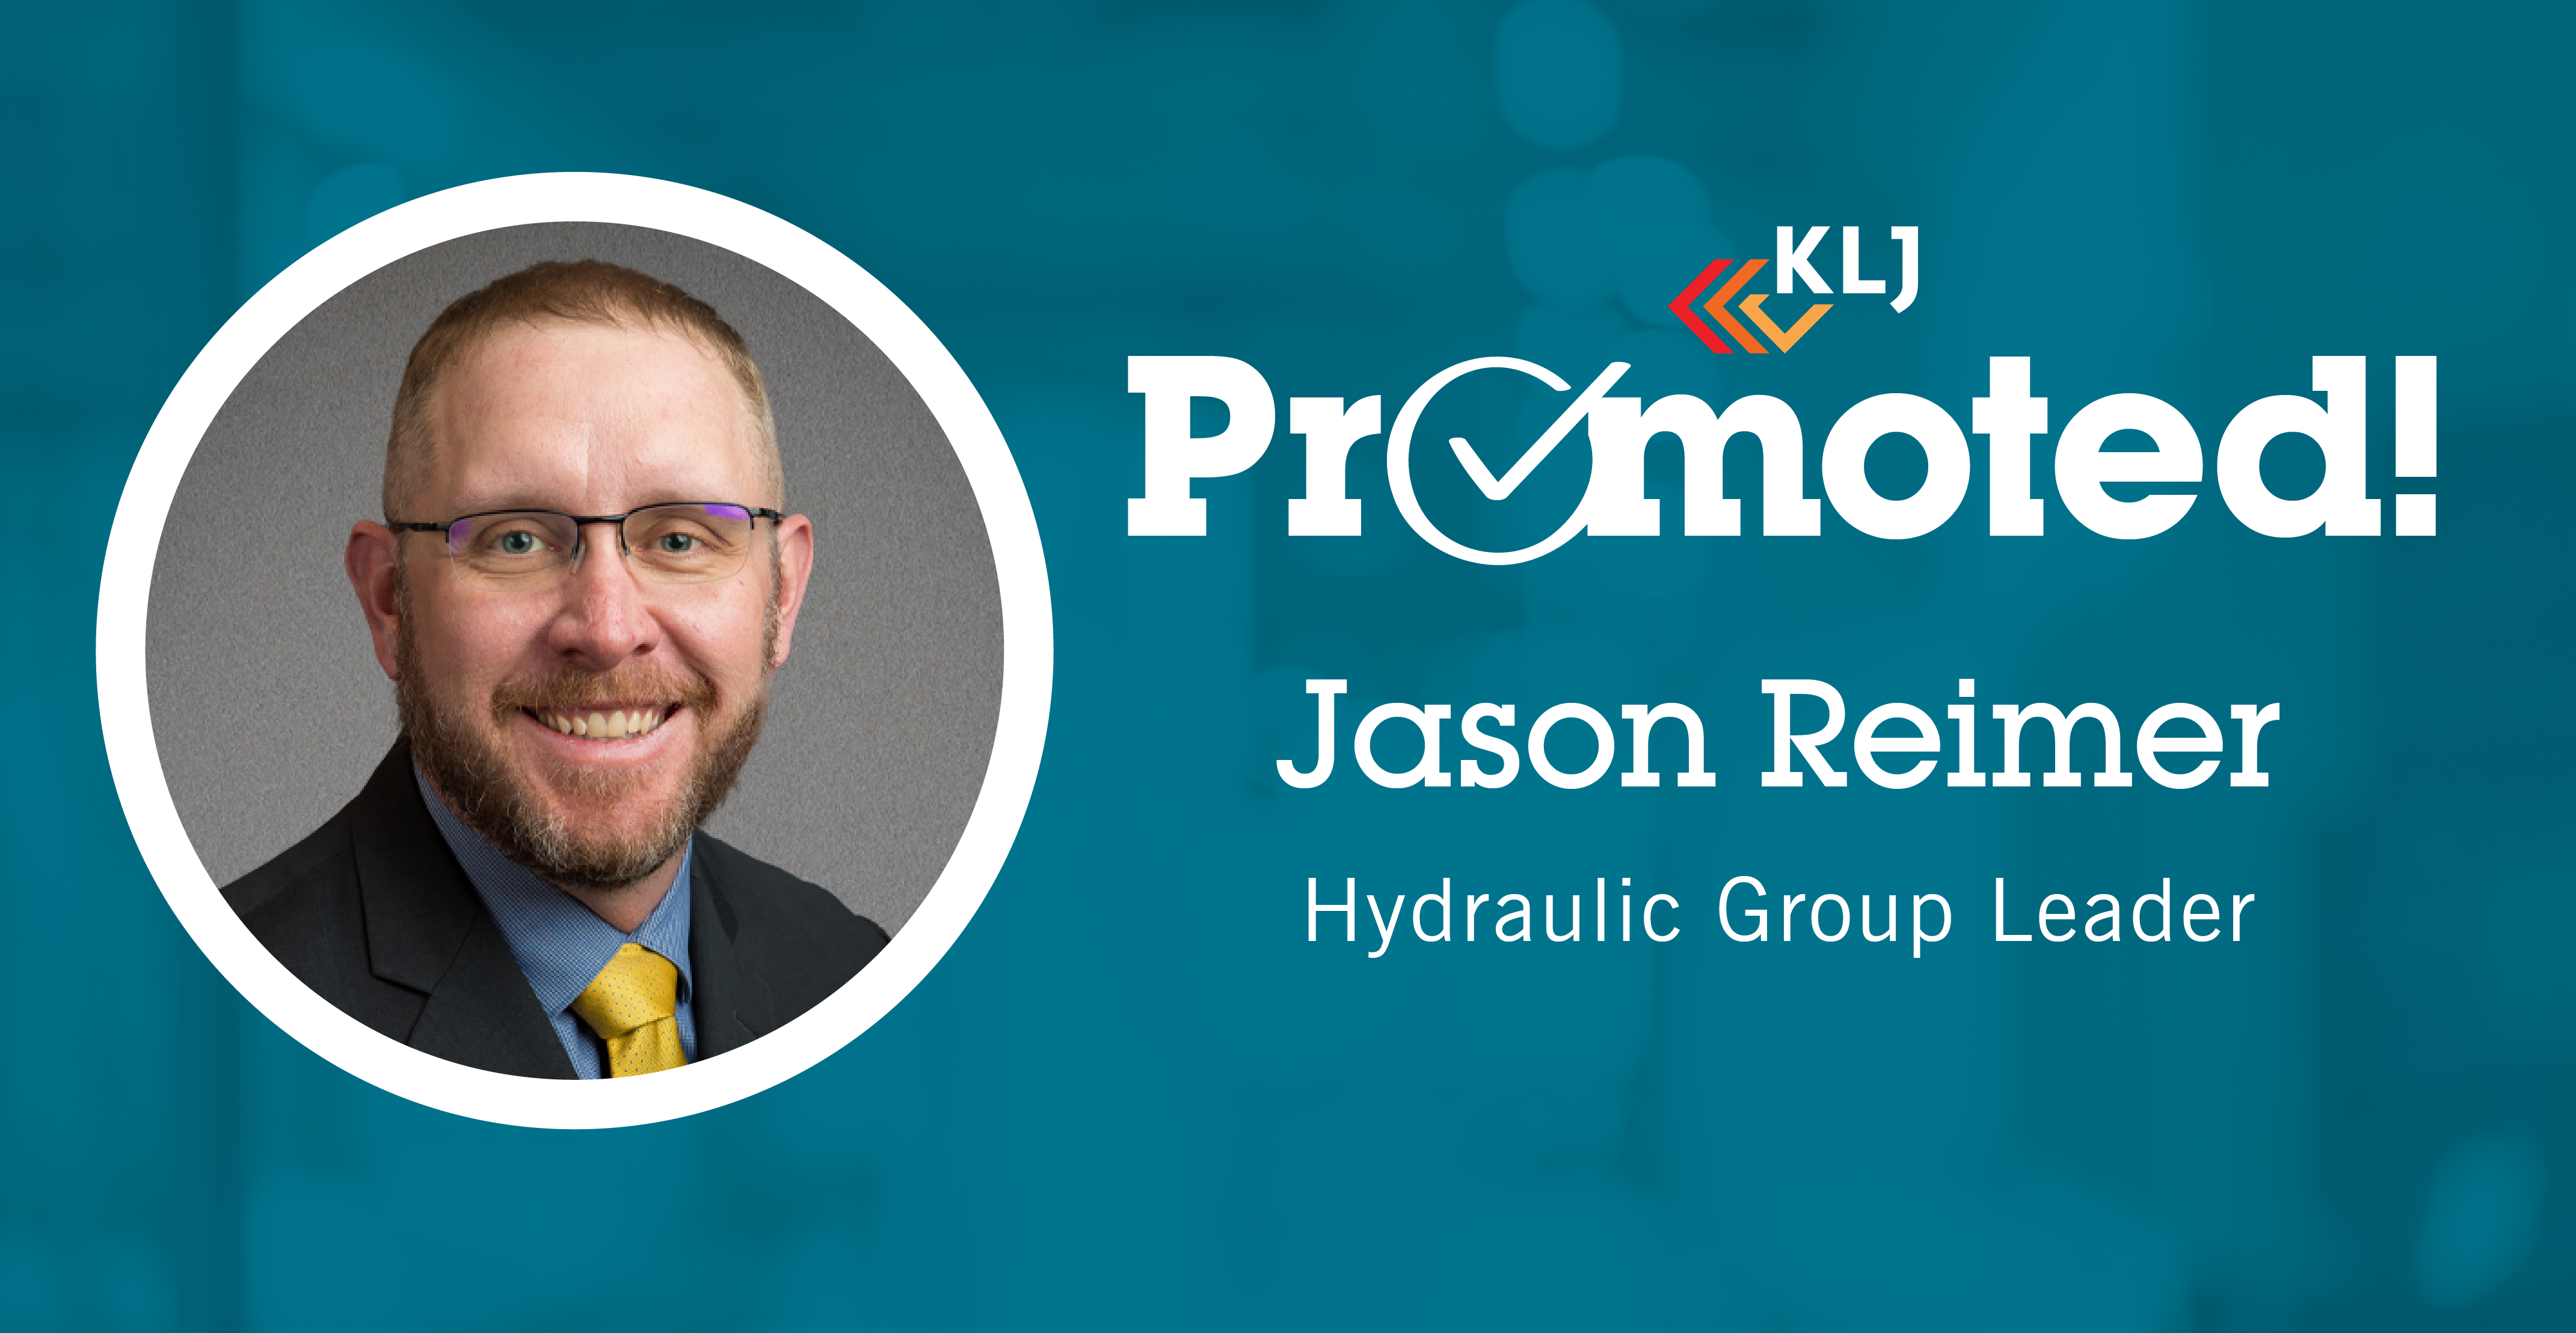 Reimer Promoted to Hydraulic Group Leader